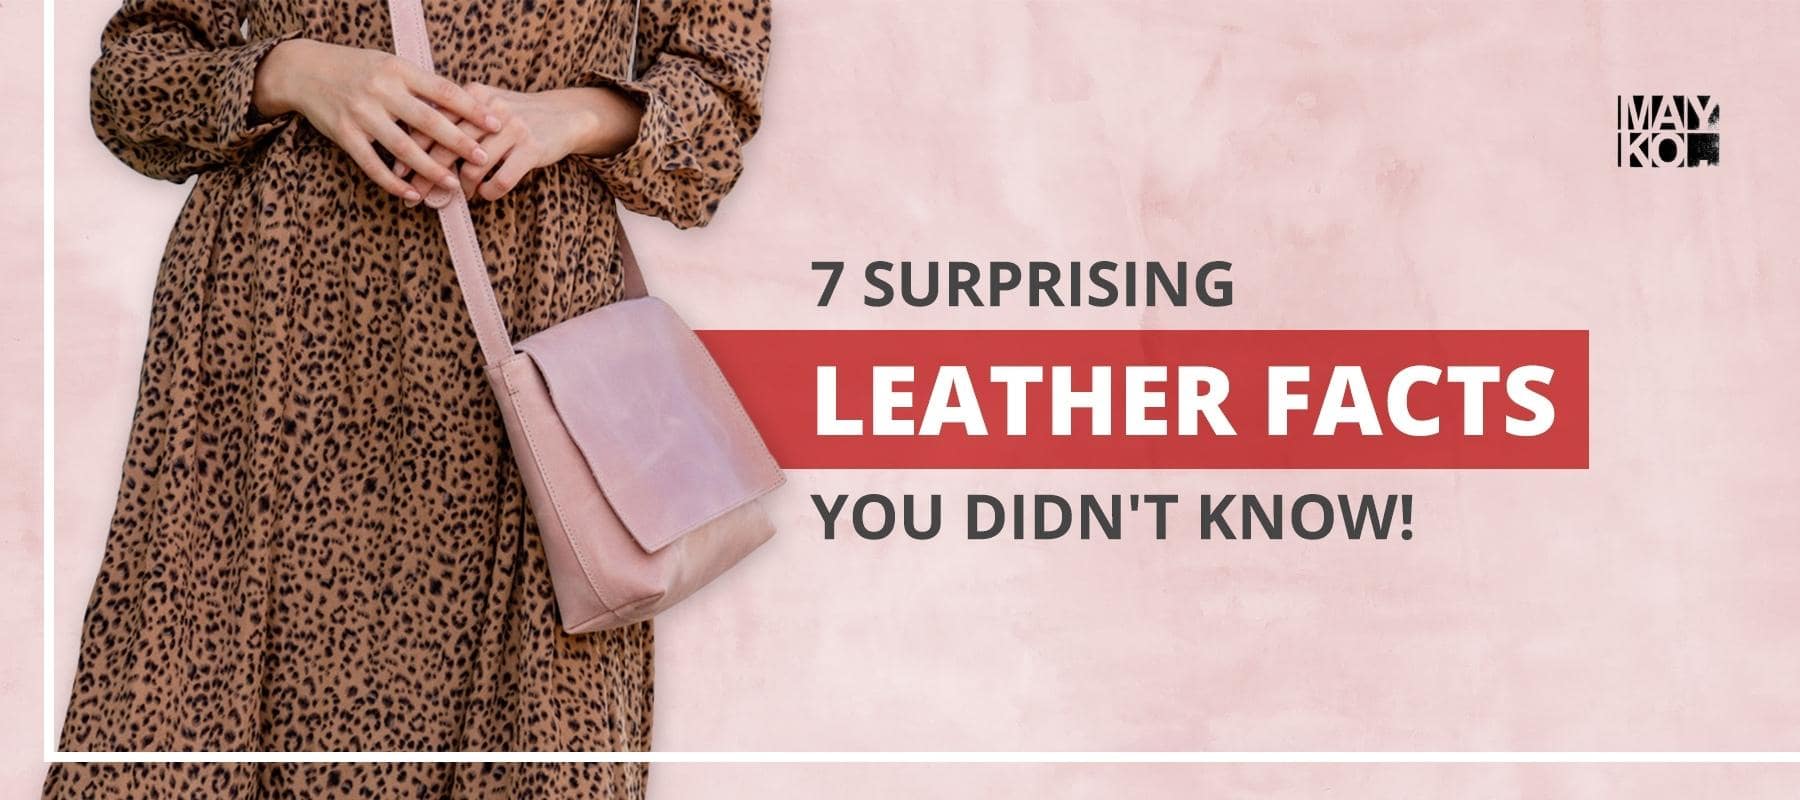 7 Surprising Leather Facts You Didn't Know!